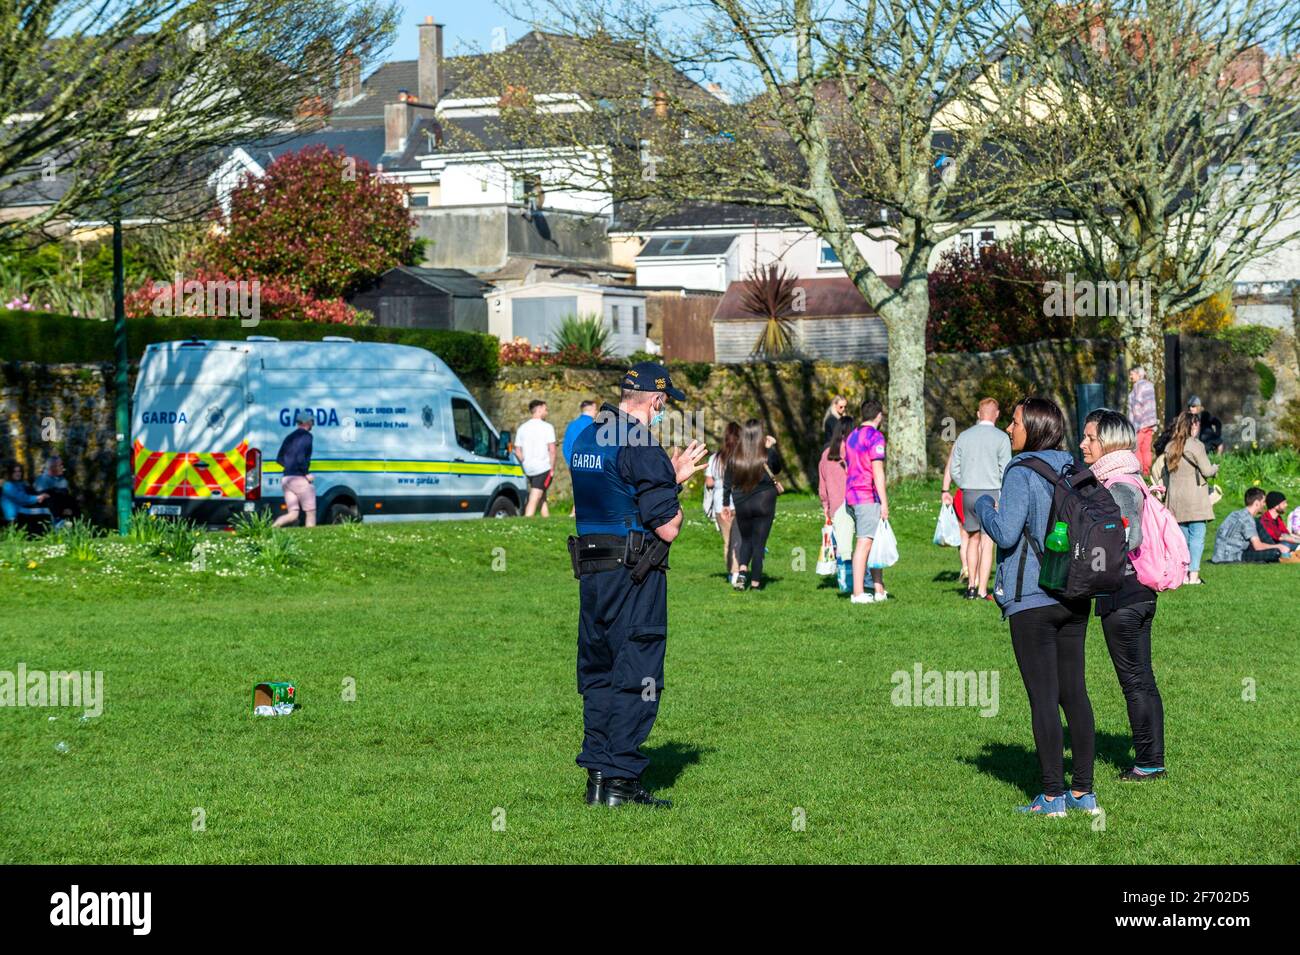 The Lough, Cork, Ireland. 3rd Apr, 2021. Crowds of people were drinking at The Lough this evening, in what was a repeat of scenes from earlier in the week. The Garda Public Order Unit soon arrived and dispersed the crowds. Credit: AG News/Alamy Live News Stock Photo